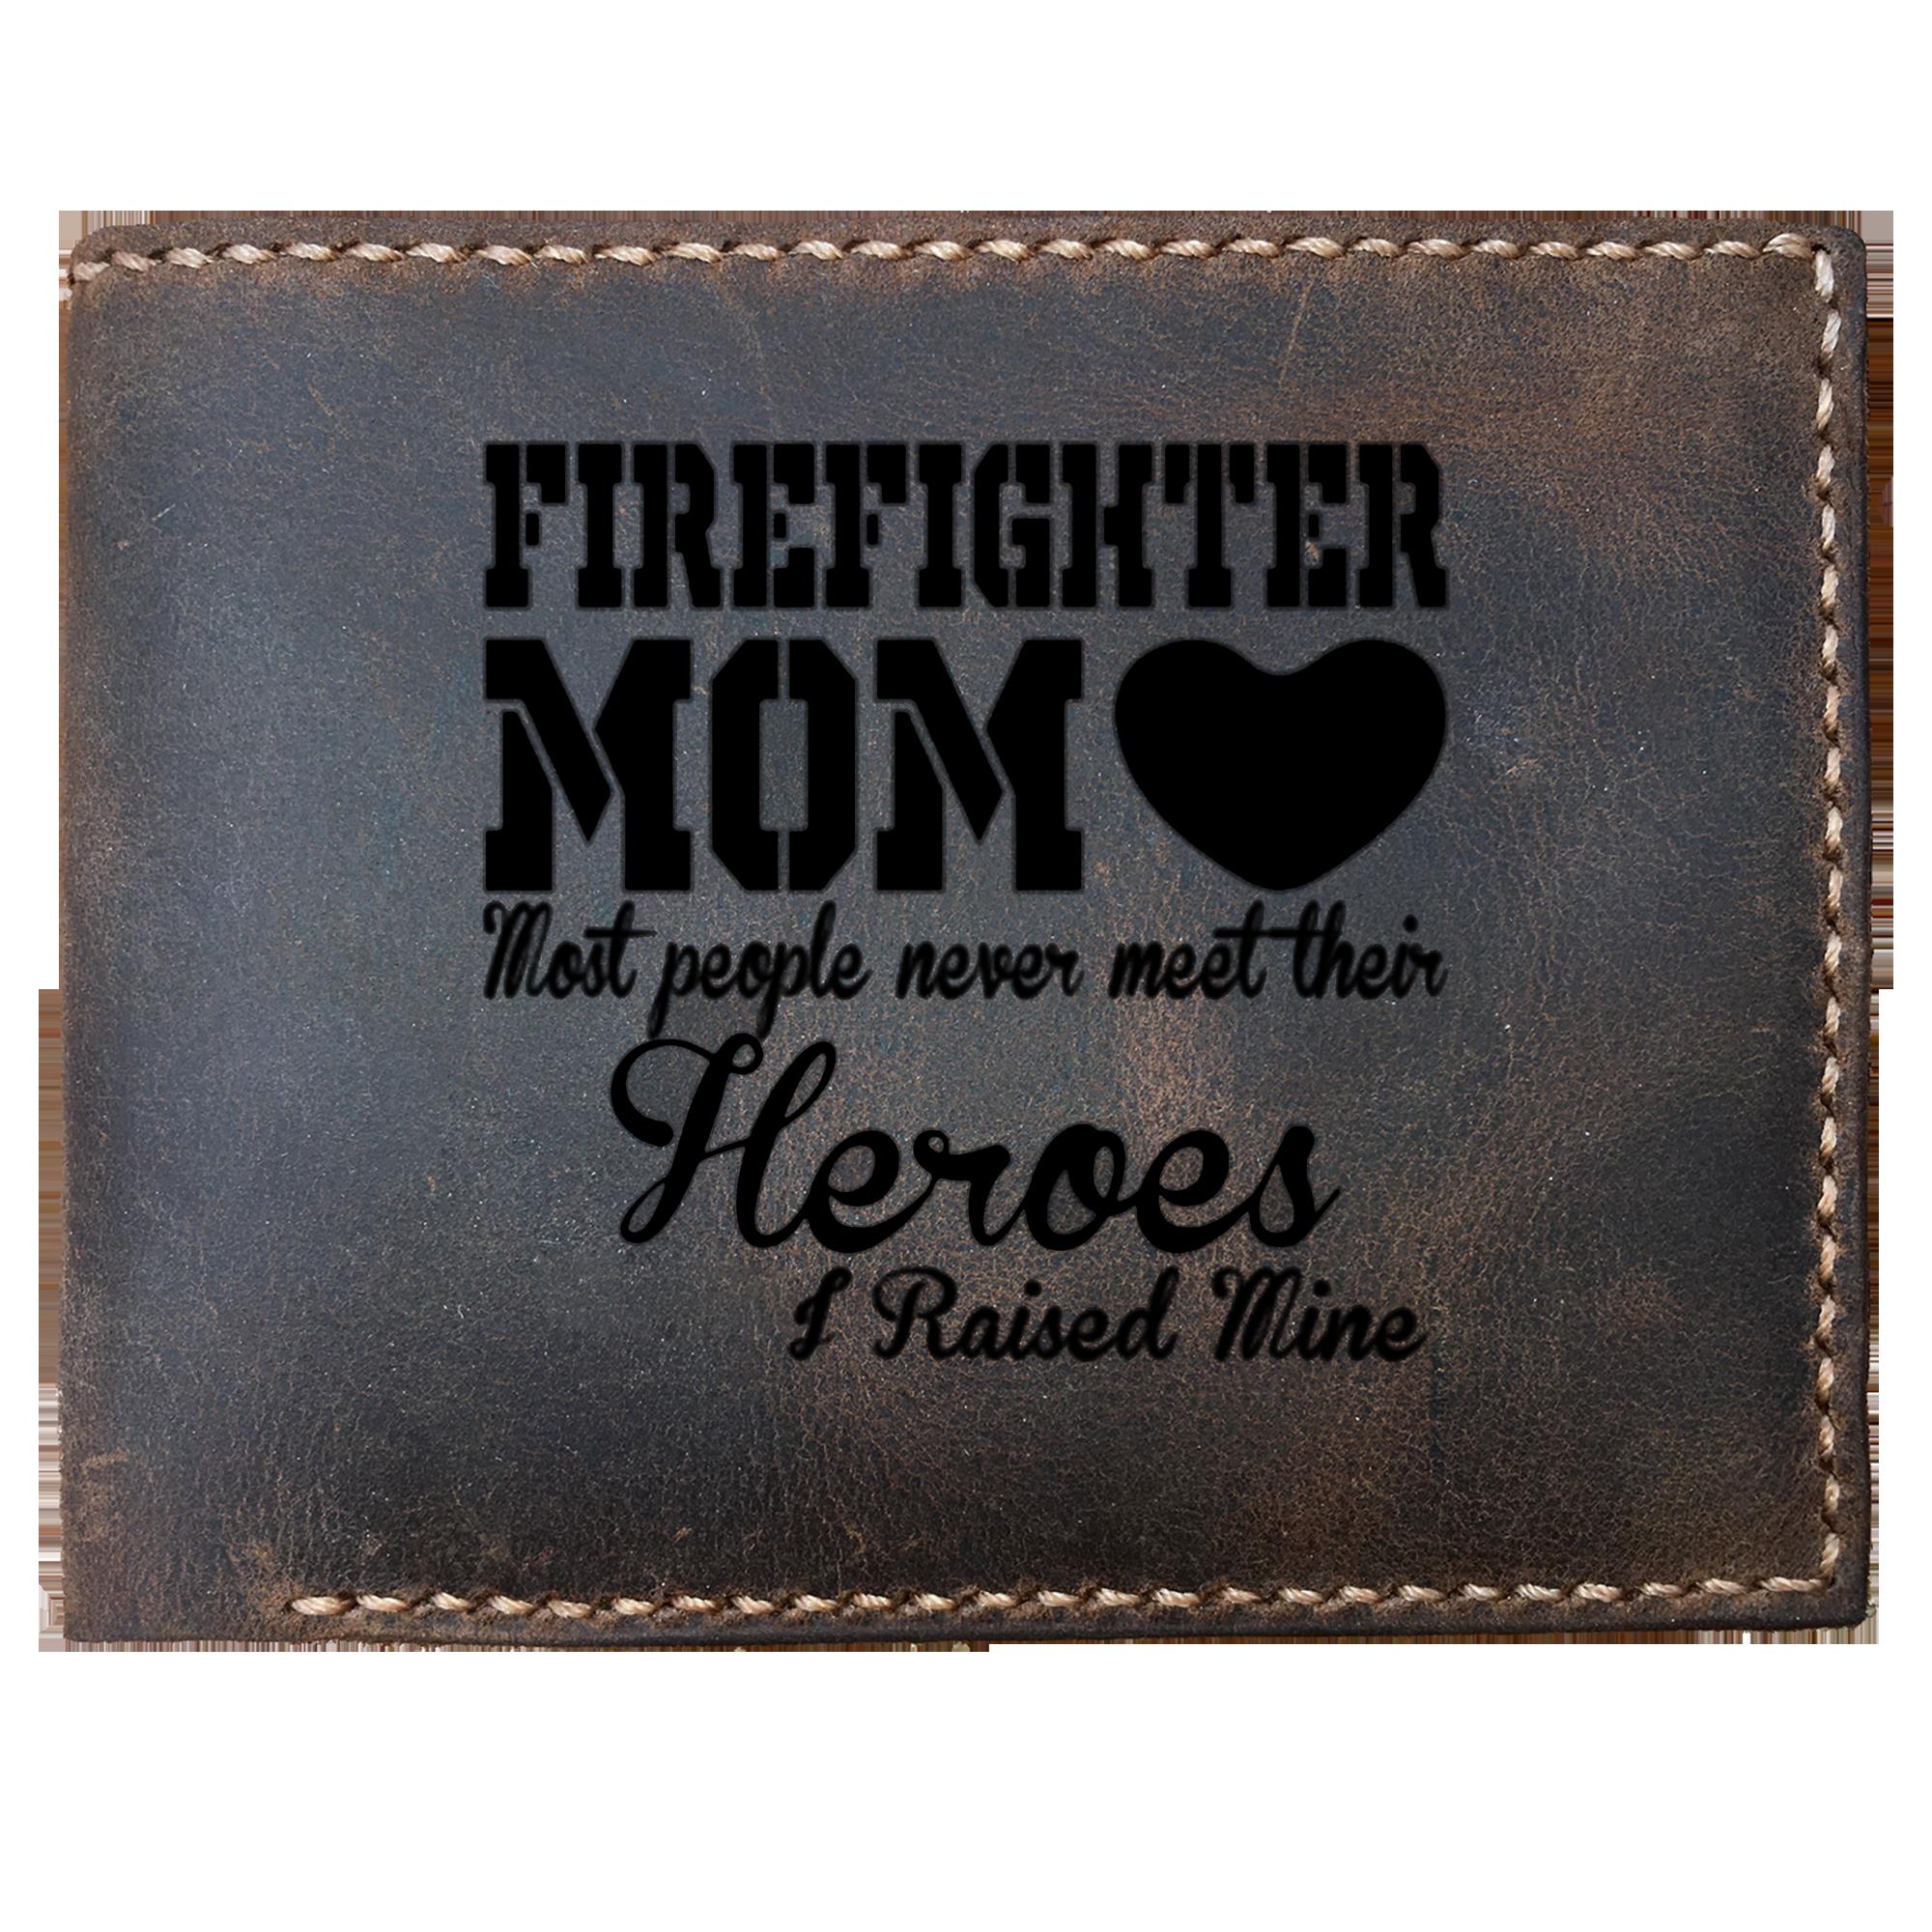 Skitongifts Funny Custom Laser Engraved Bifold Leather Wallet For Men, Firefighter Mom Most People Never Meet